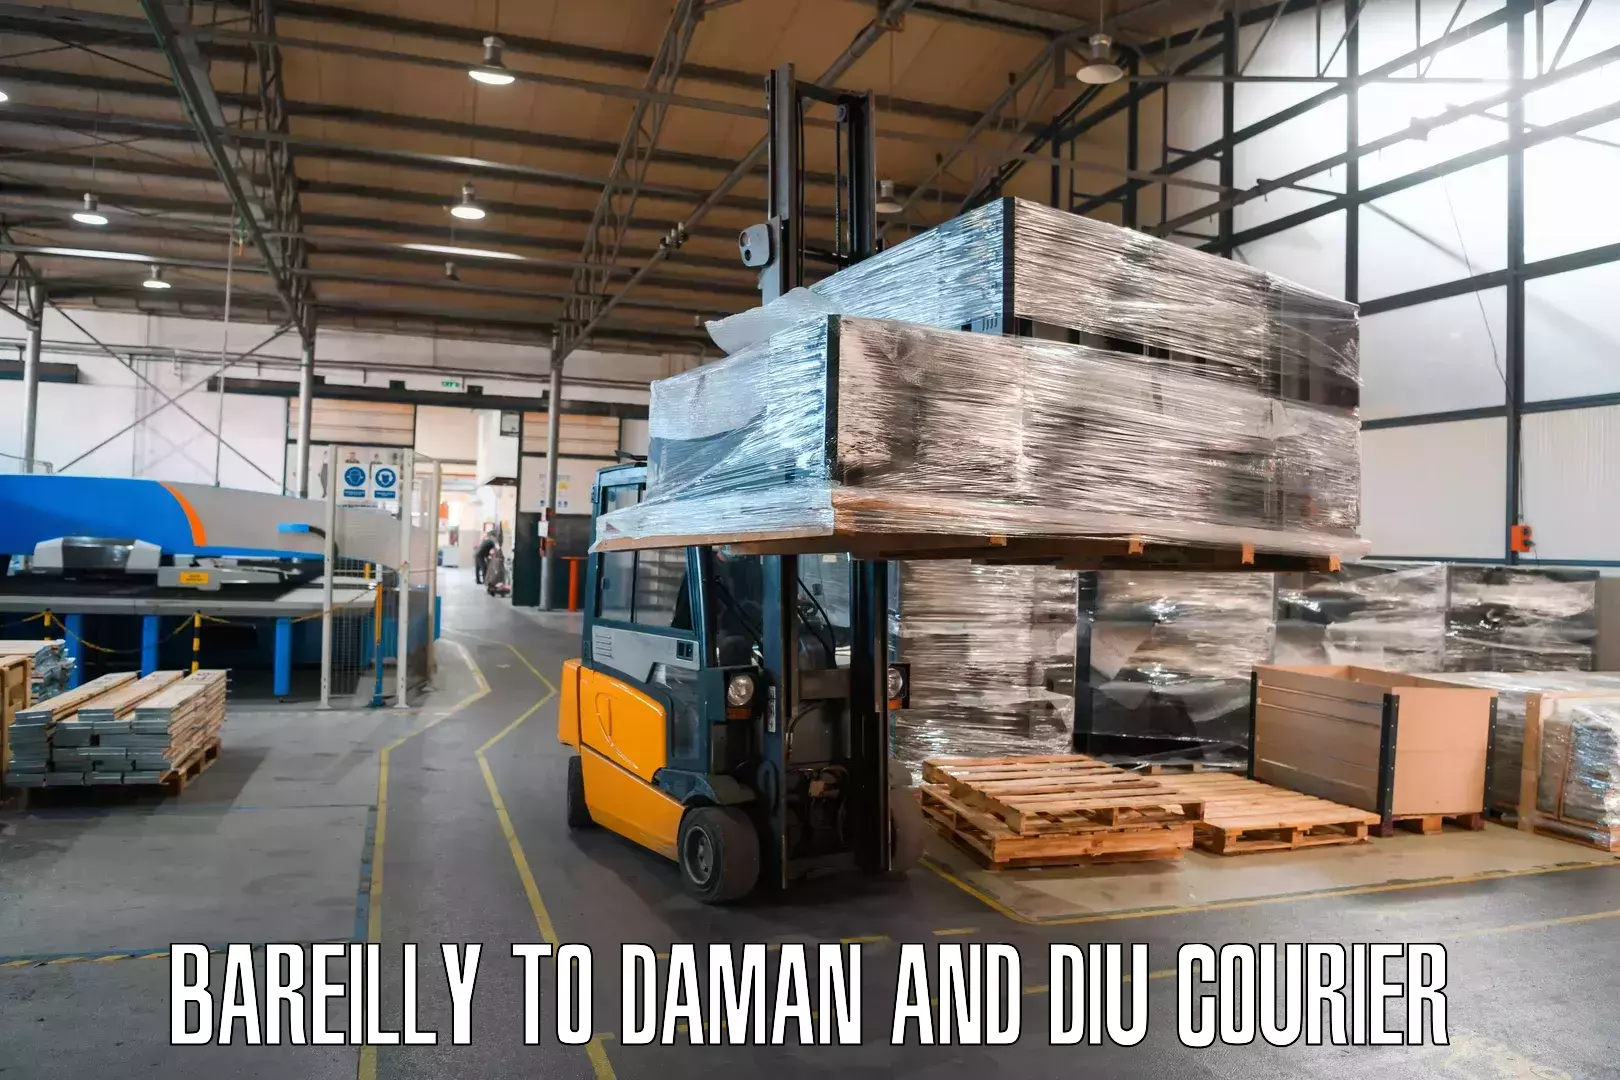 International courier networks Bareilly to Diu